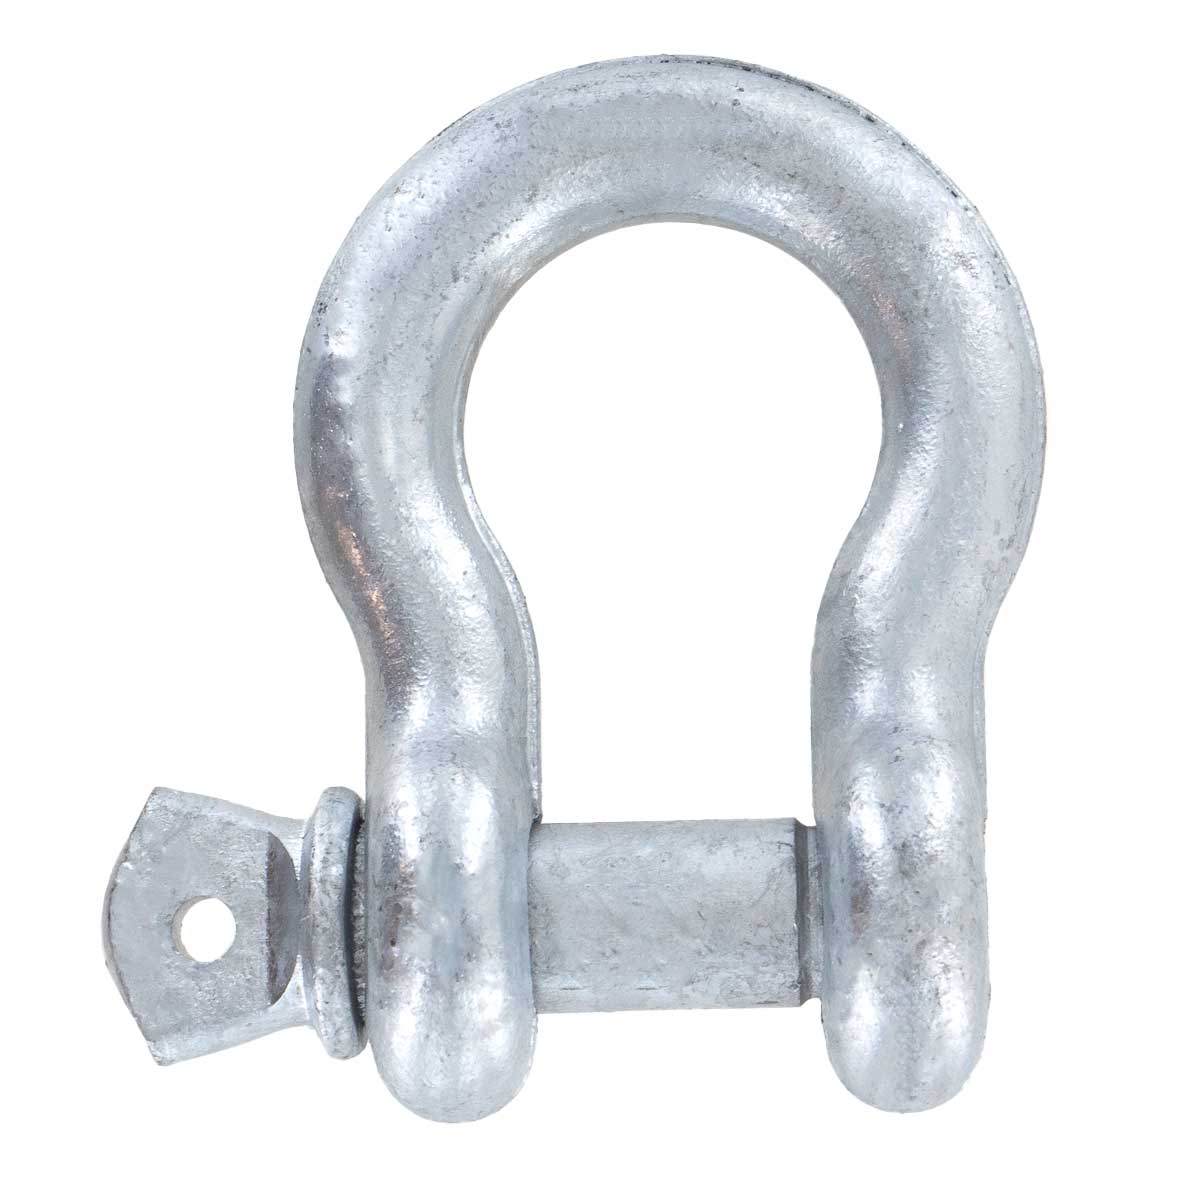 1-3/4" Galvanized Screw Pin Anchor Shackle - 25 Ton rear view